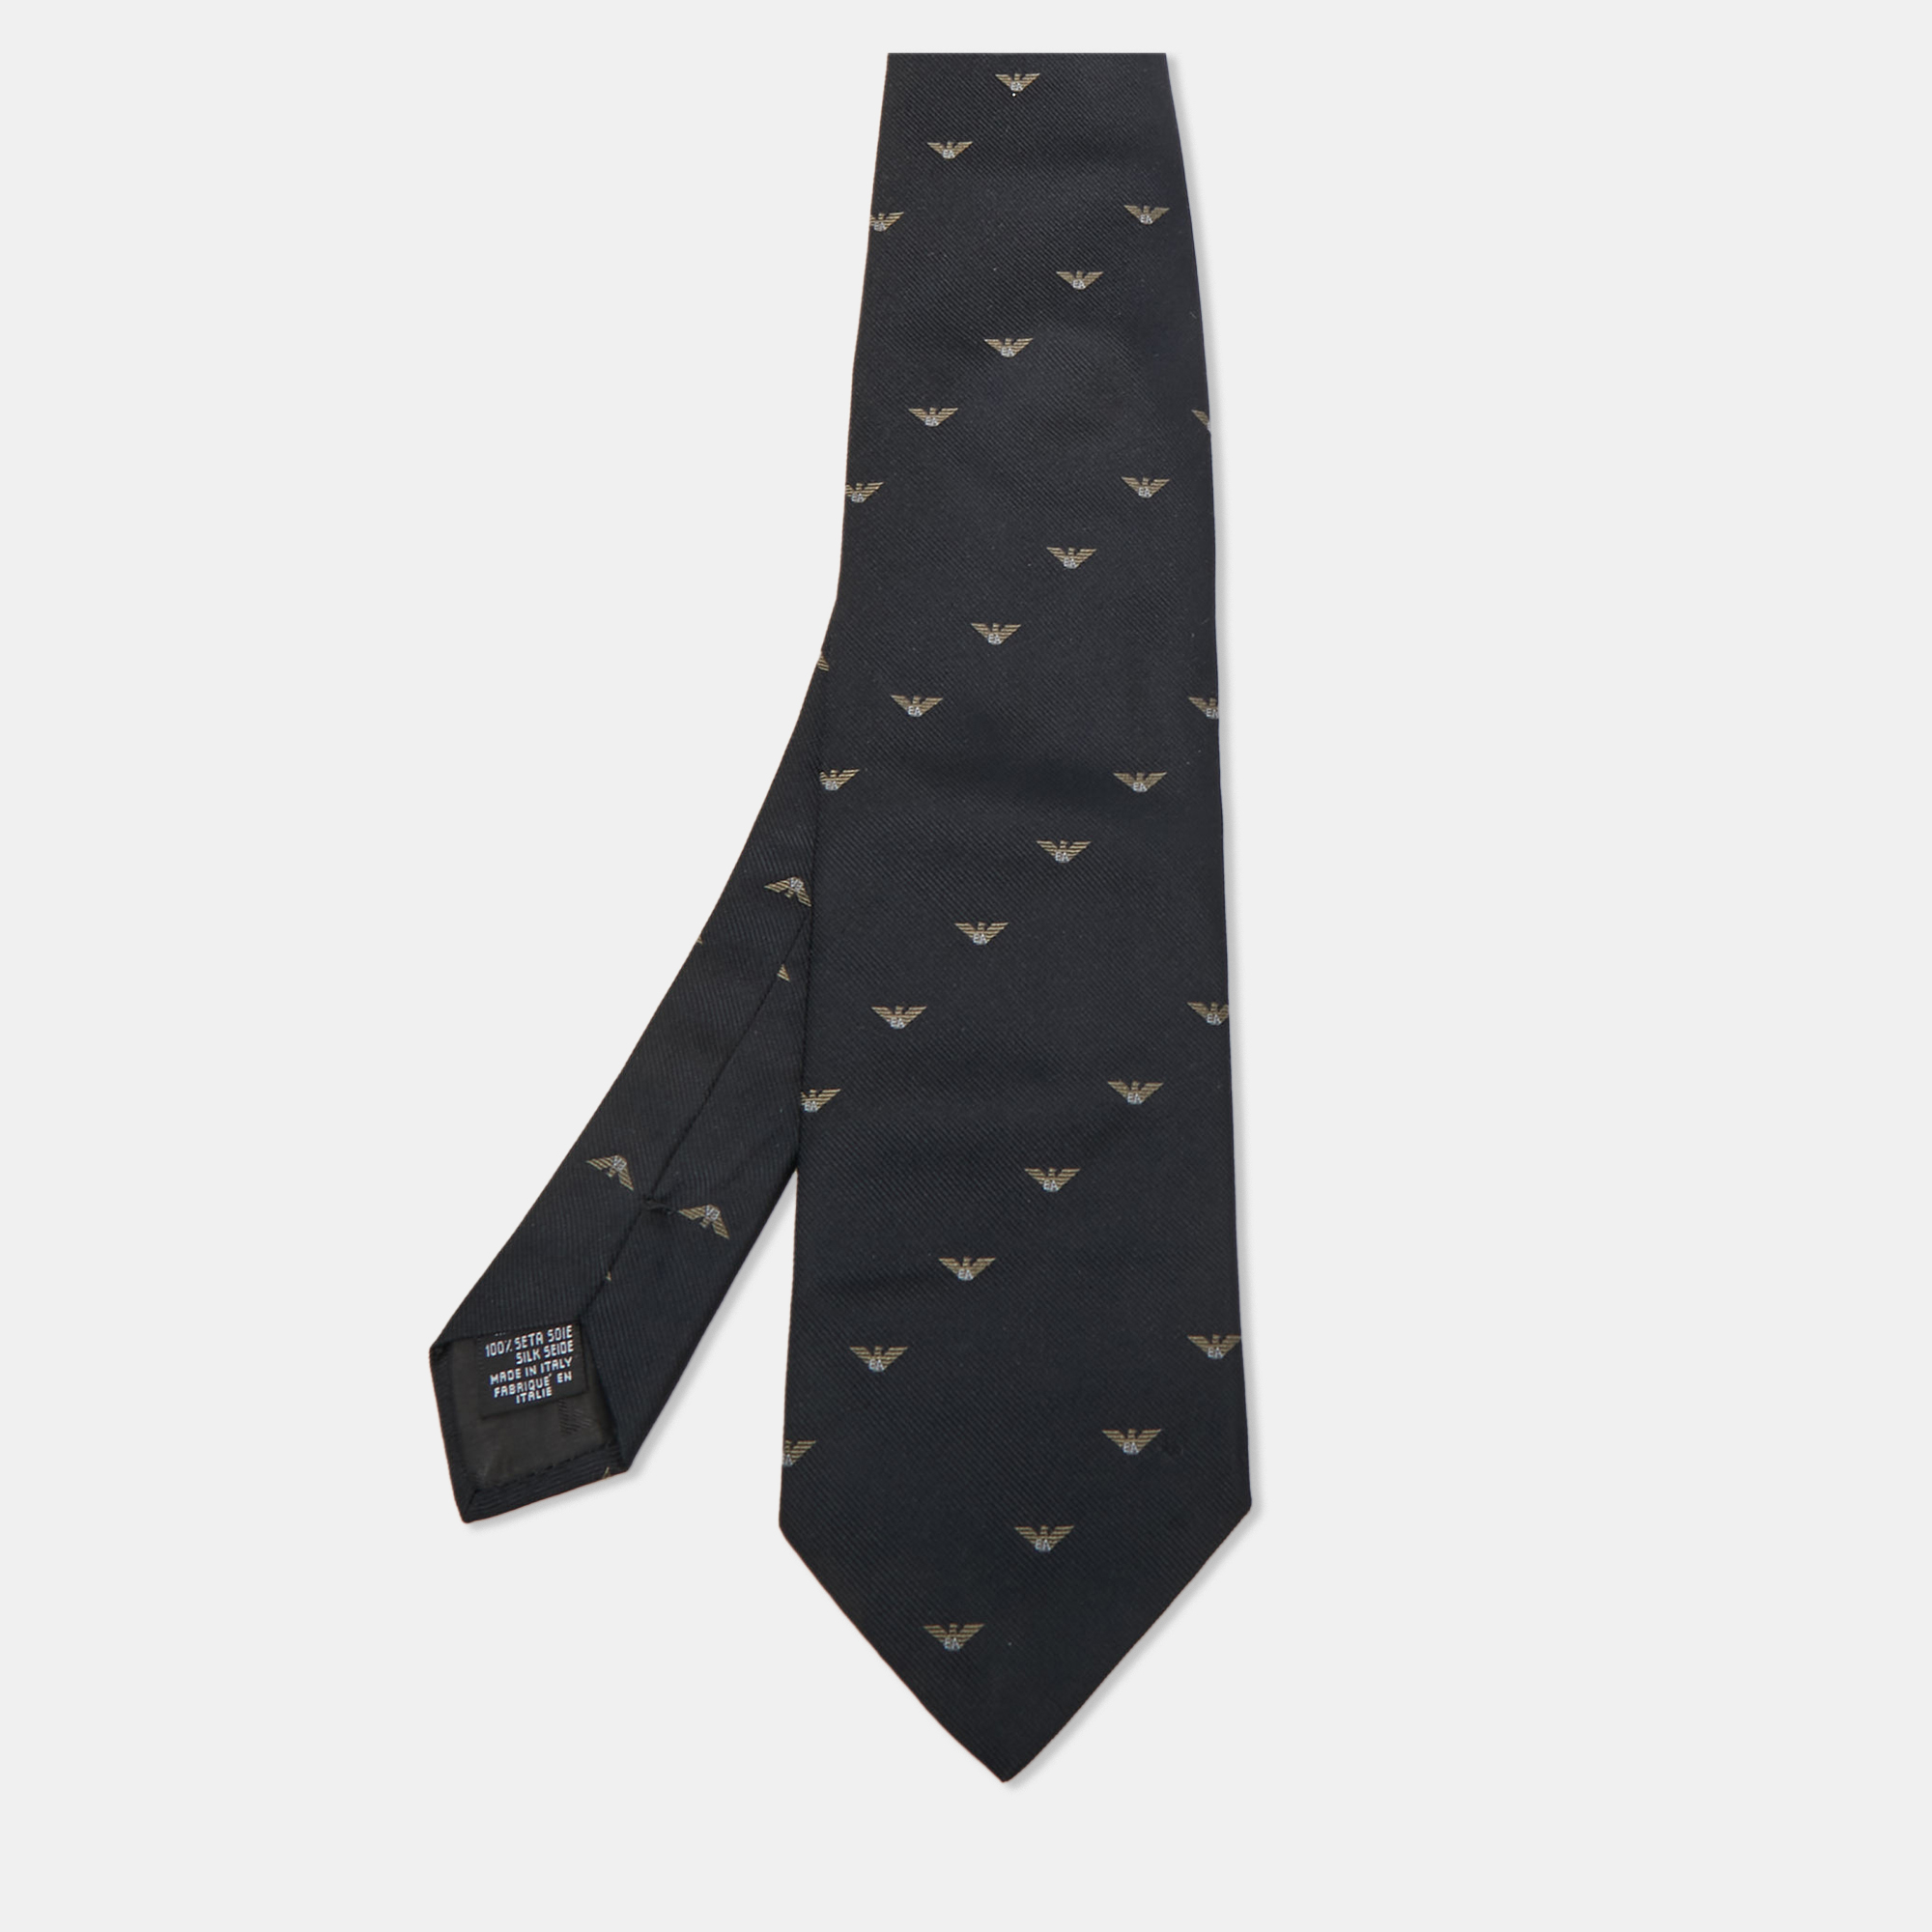 This tie is a perfect formal accessory that has a sharp and modern appeal. Made from luxurious materials it features intricate patterns and the brand label neatly stitched at the back. It is sure to add oodles of style to your blazers.